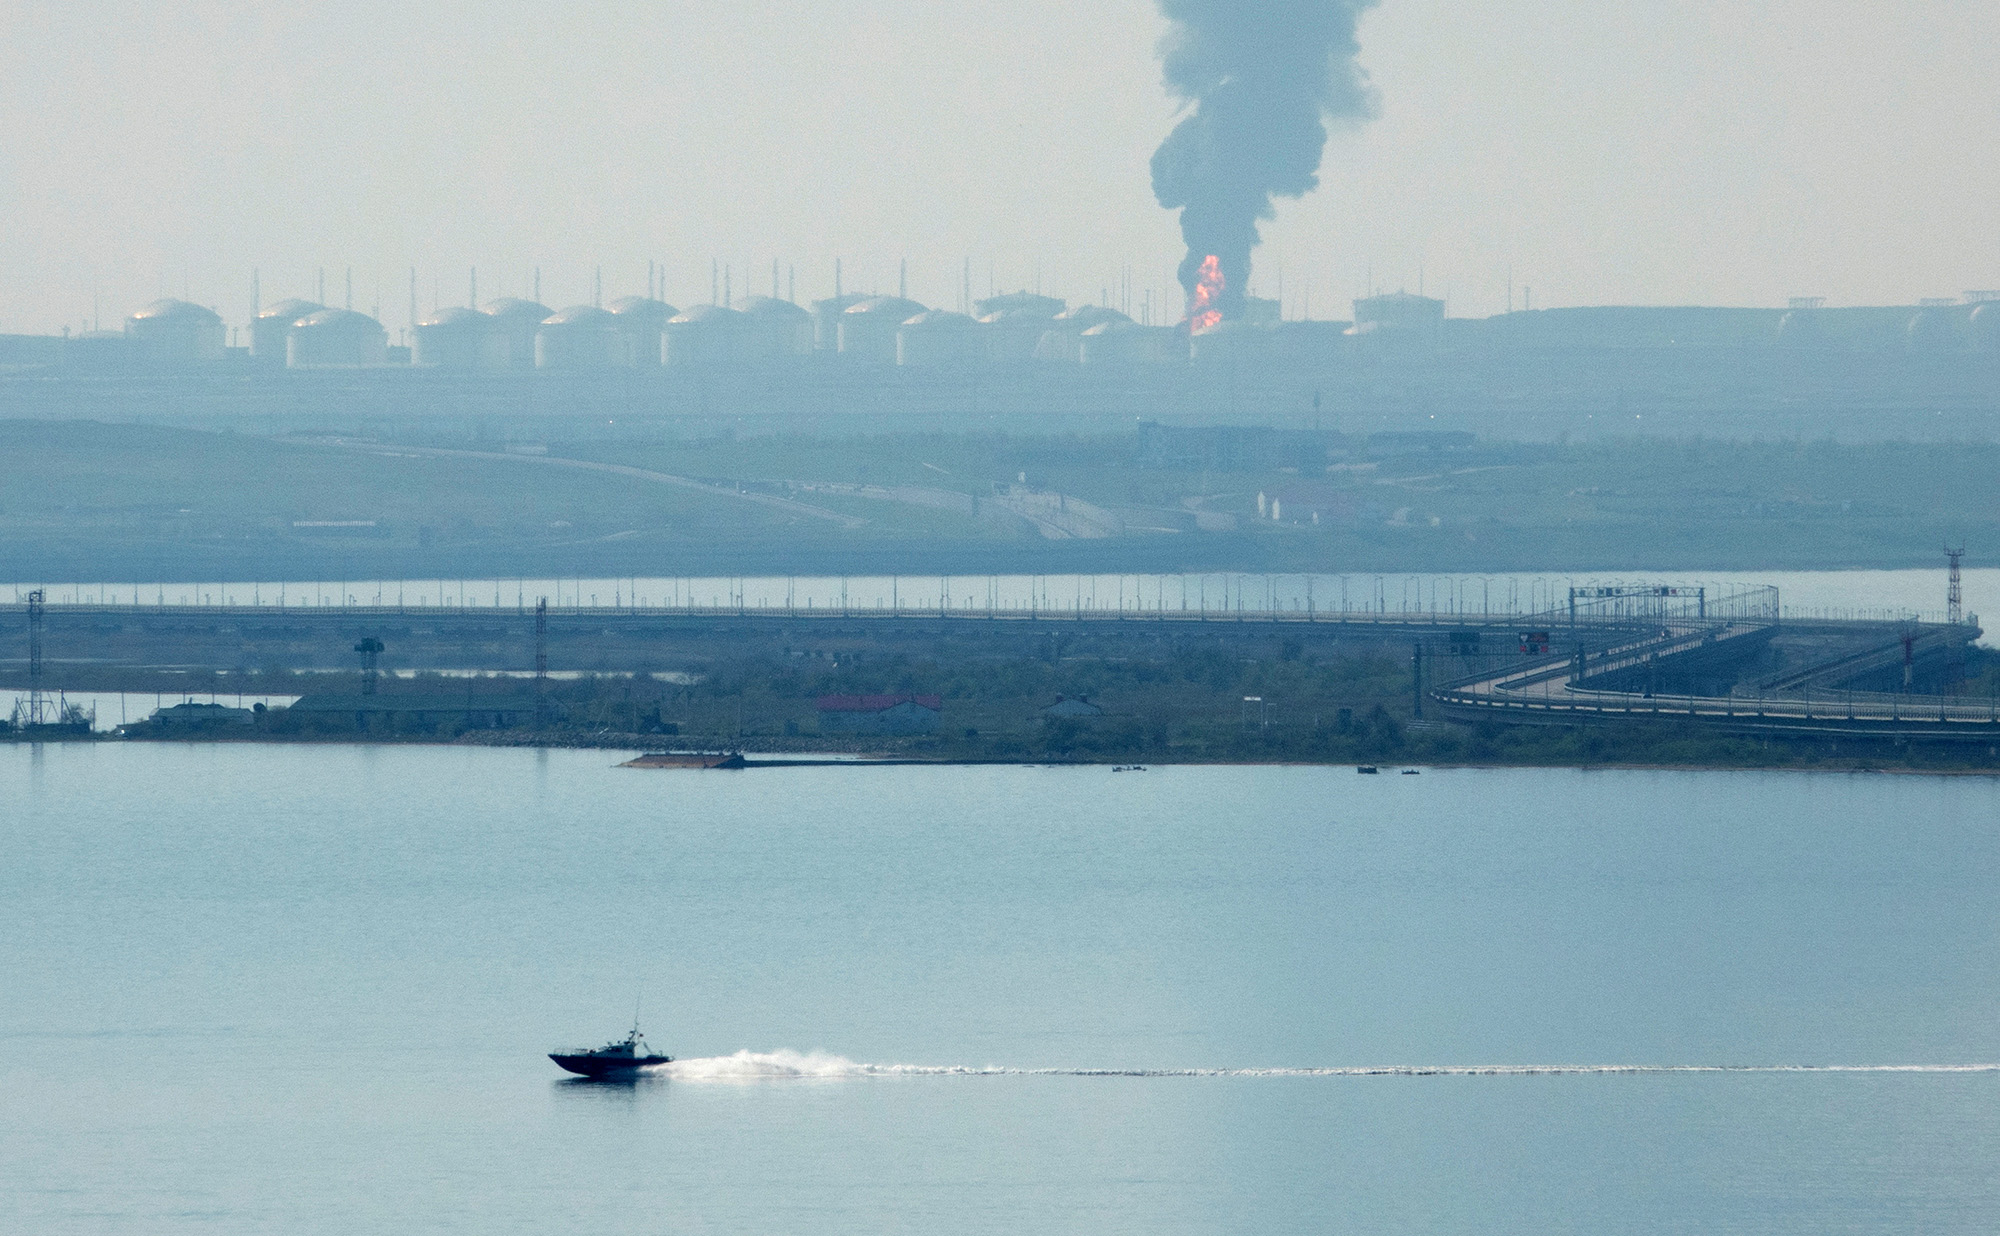 A view across the Kerch Strait shows a fuel depot on fire near the village of Volna in Russia's Krasnodar region as seen from the coastline in Crimea, on May 3.